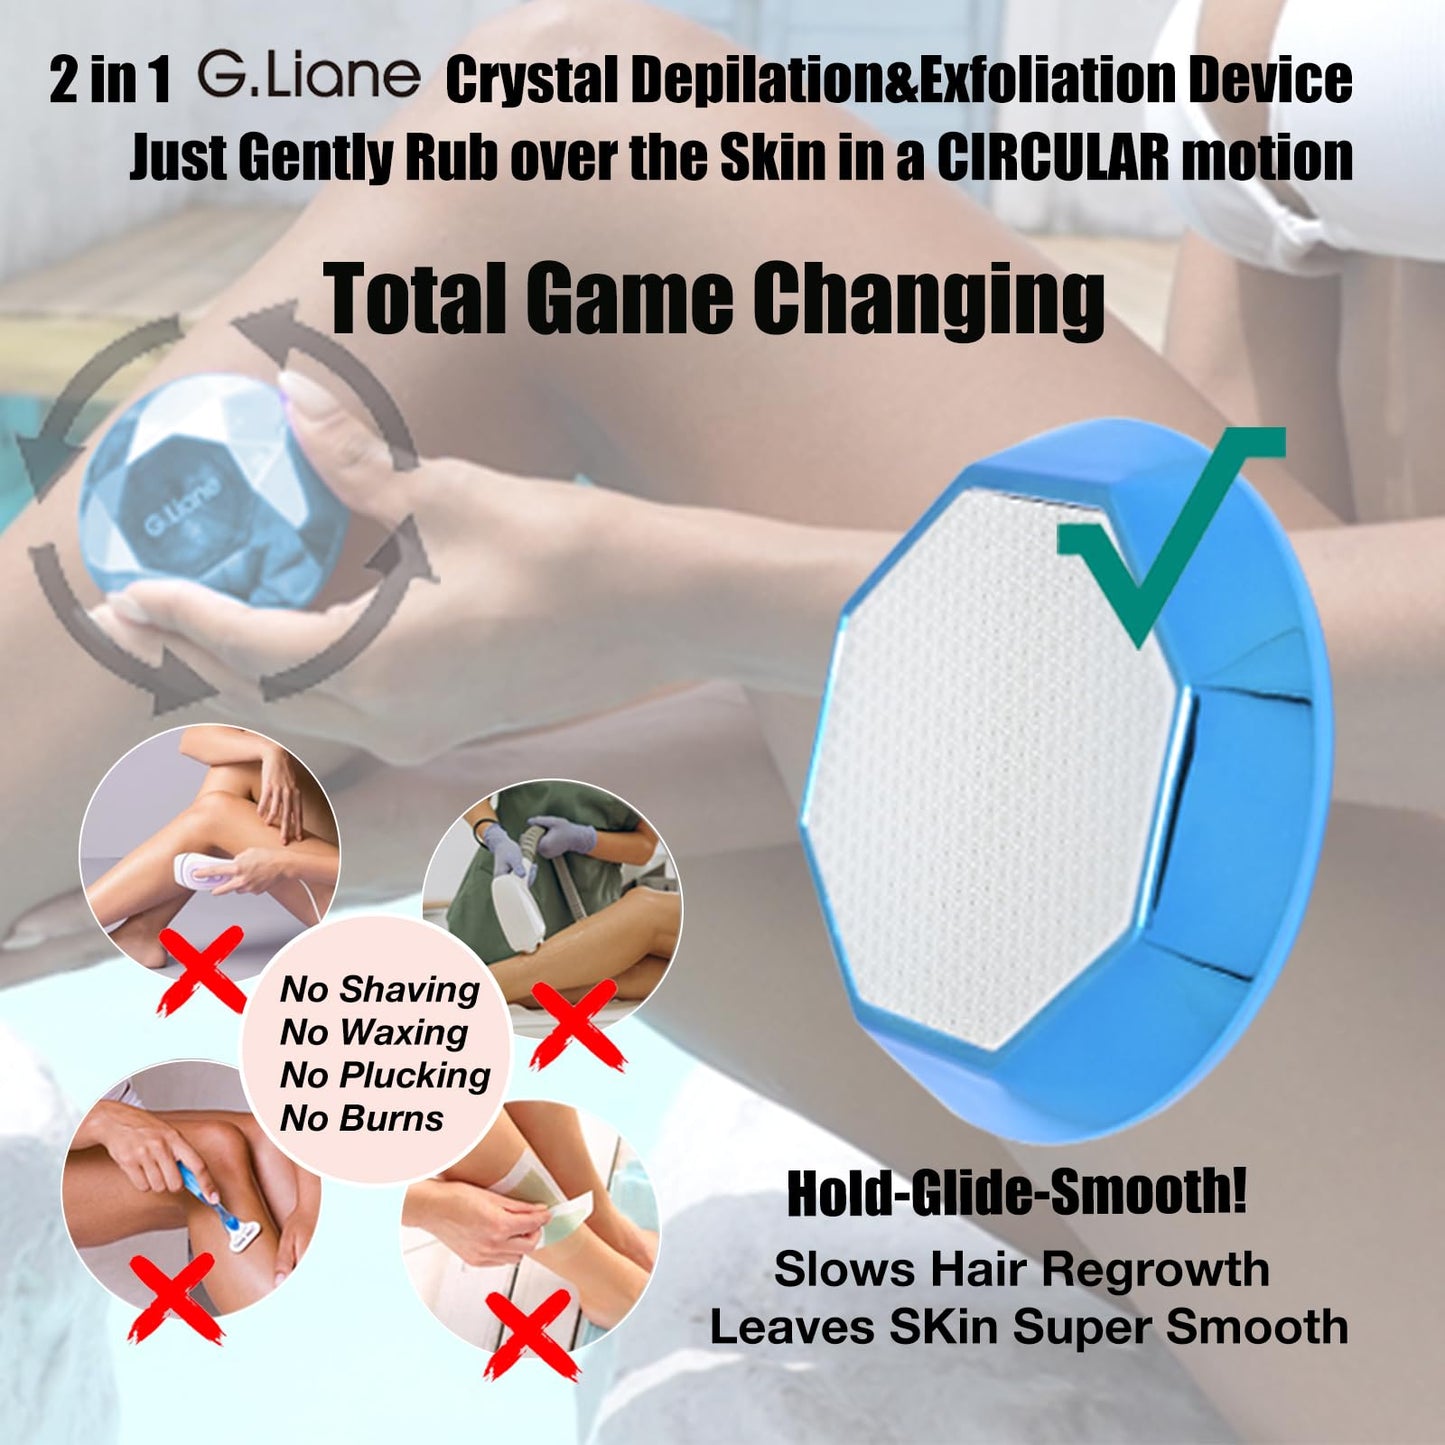 G.Liane Crystal Hair Eraser,Painless Crystal Hair Remover Diamond,Exfoliation Hair Removal Device Without Waxing,Natural Lady Hair Trimmer and Shaver for Women and Men(Royal Blue)